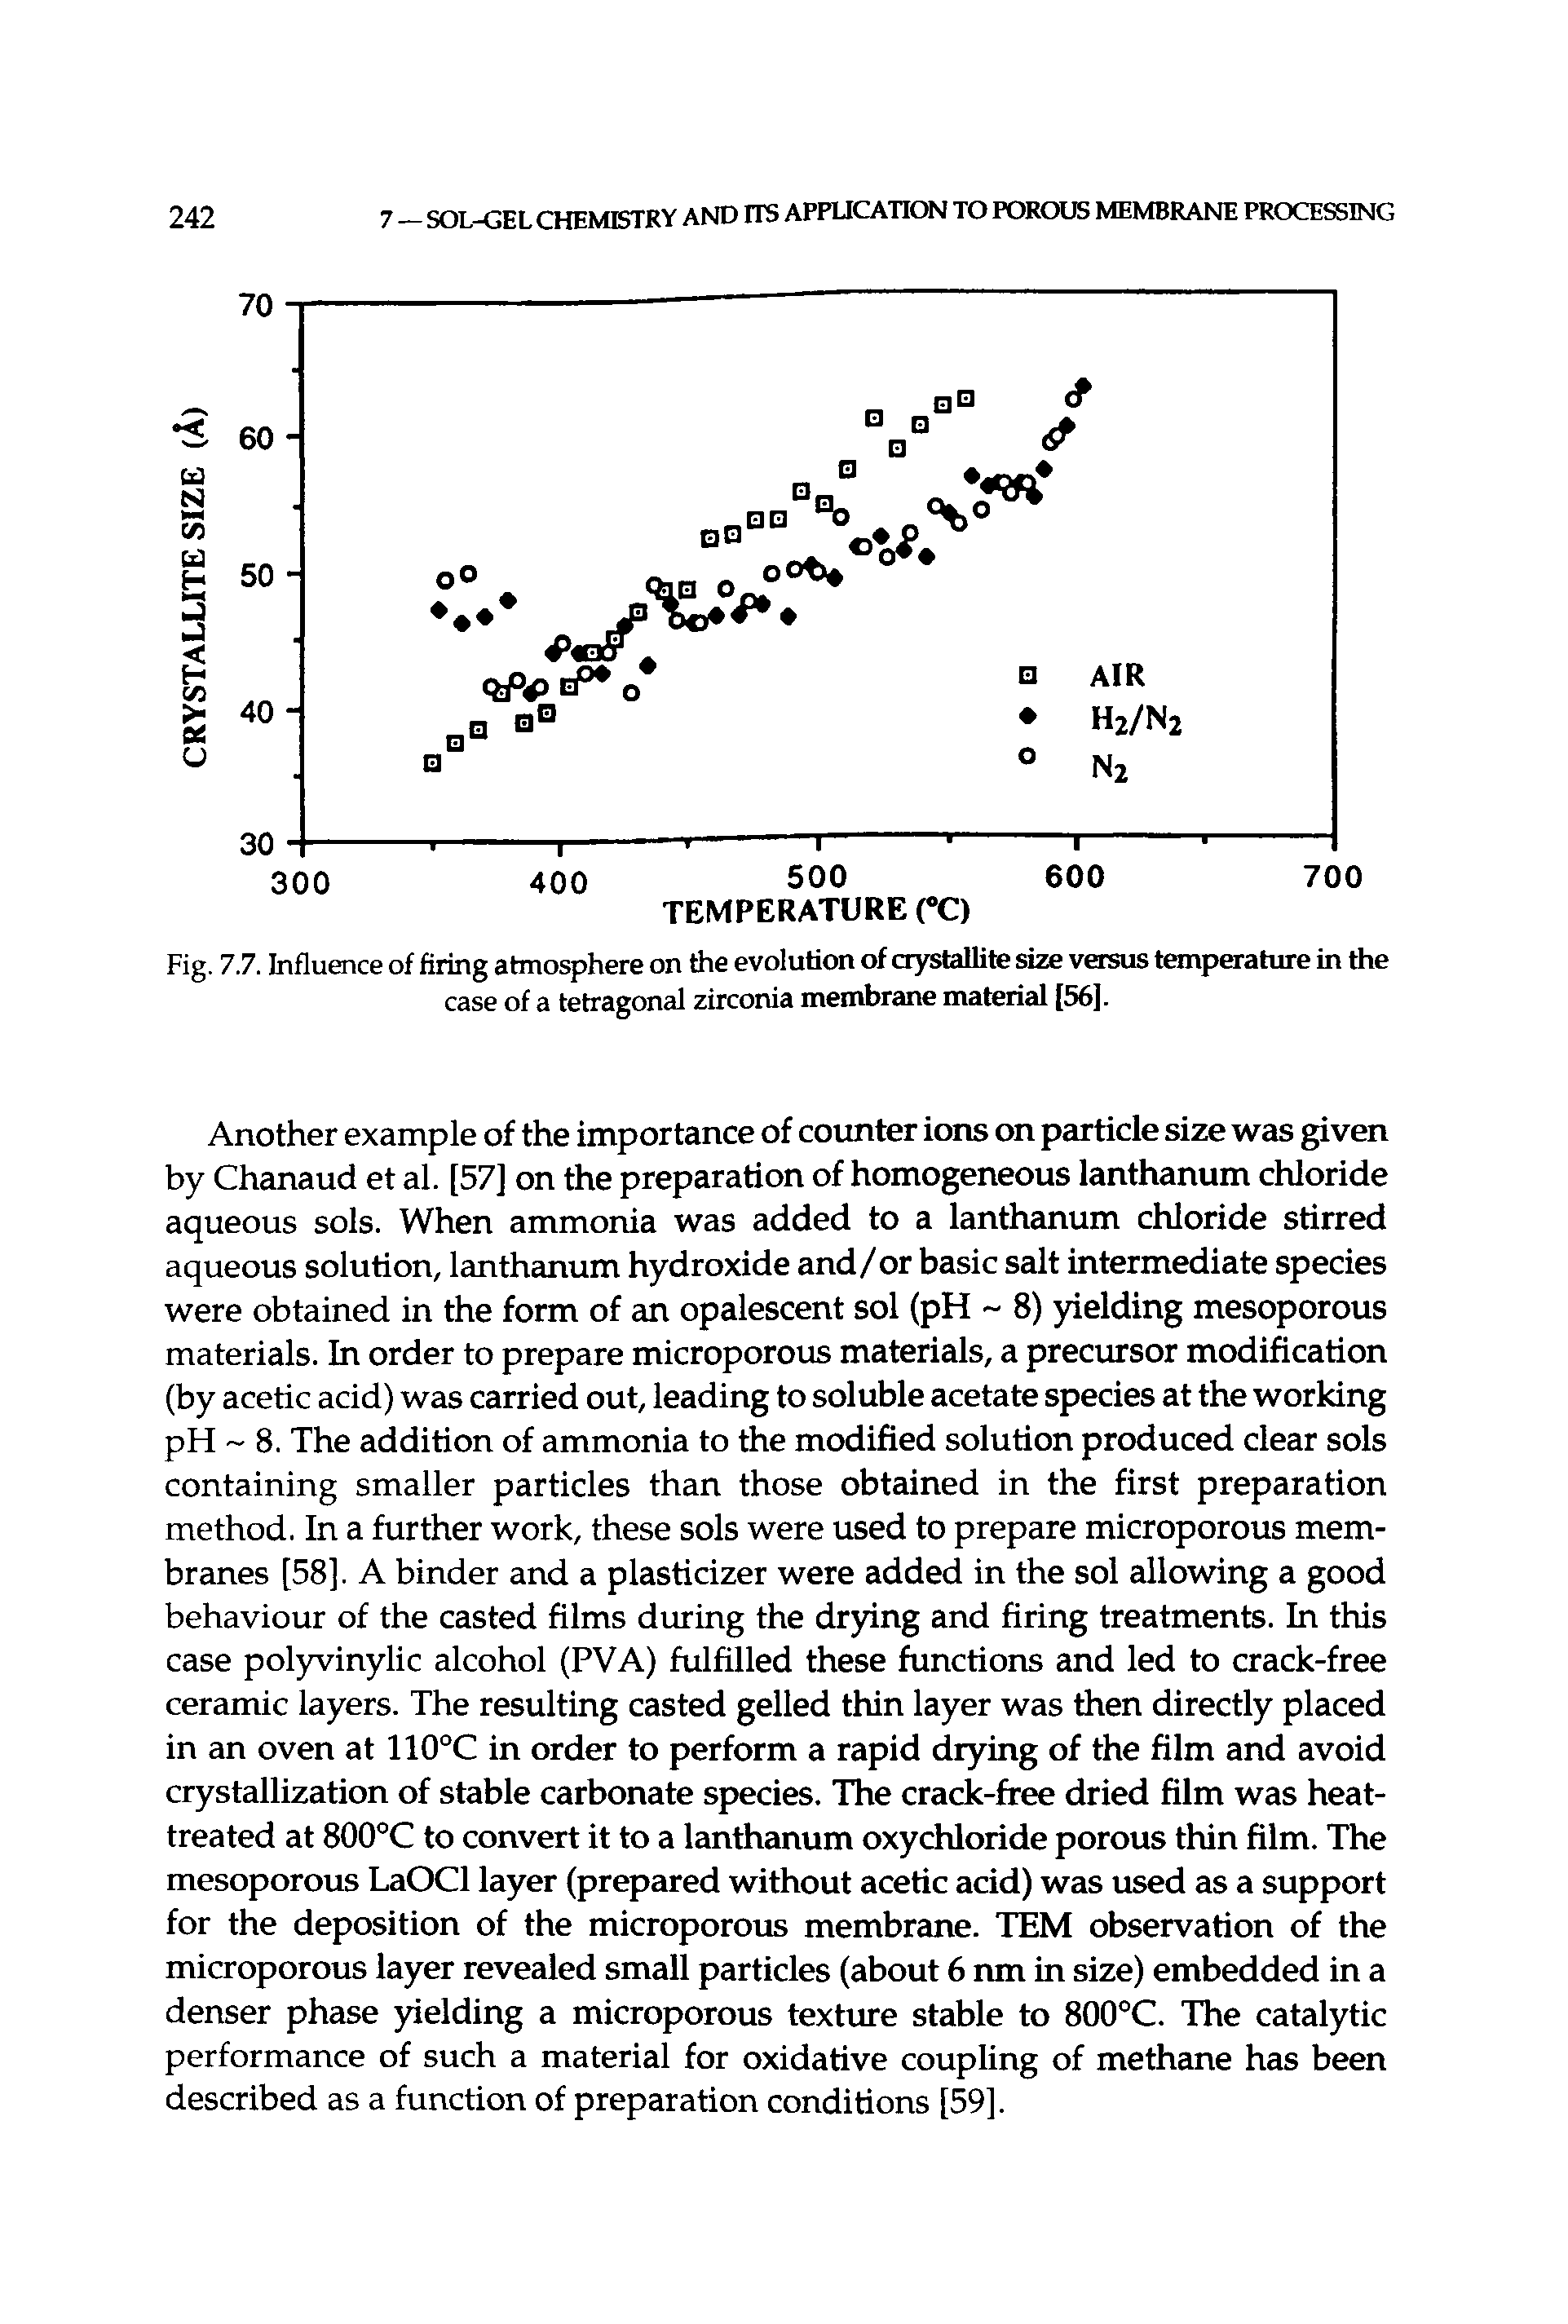 Fig. 7.7. Influence of firing atmosphere on the evolution of crystallite size versus temperature in the case of a tetragonal zirconia membrane material [56].